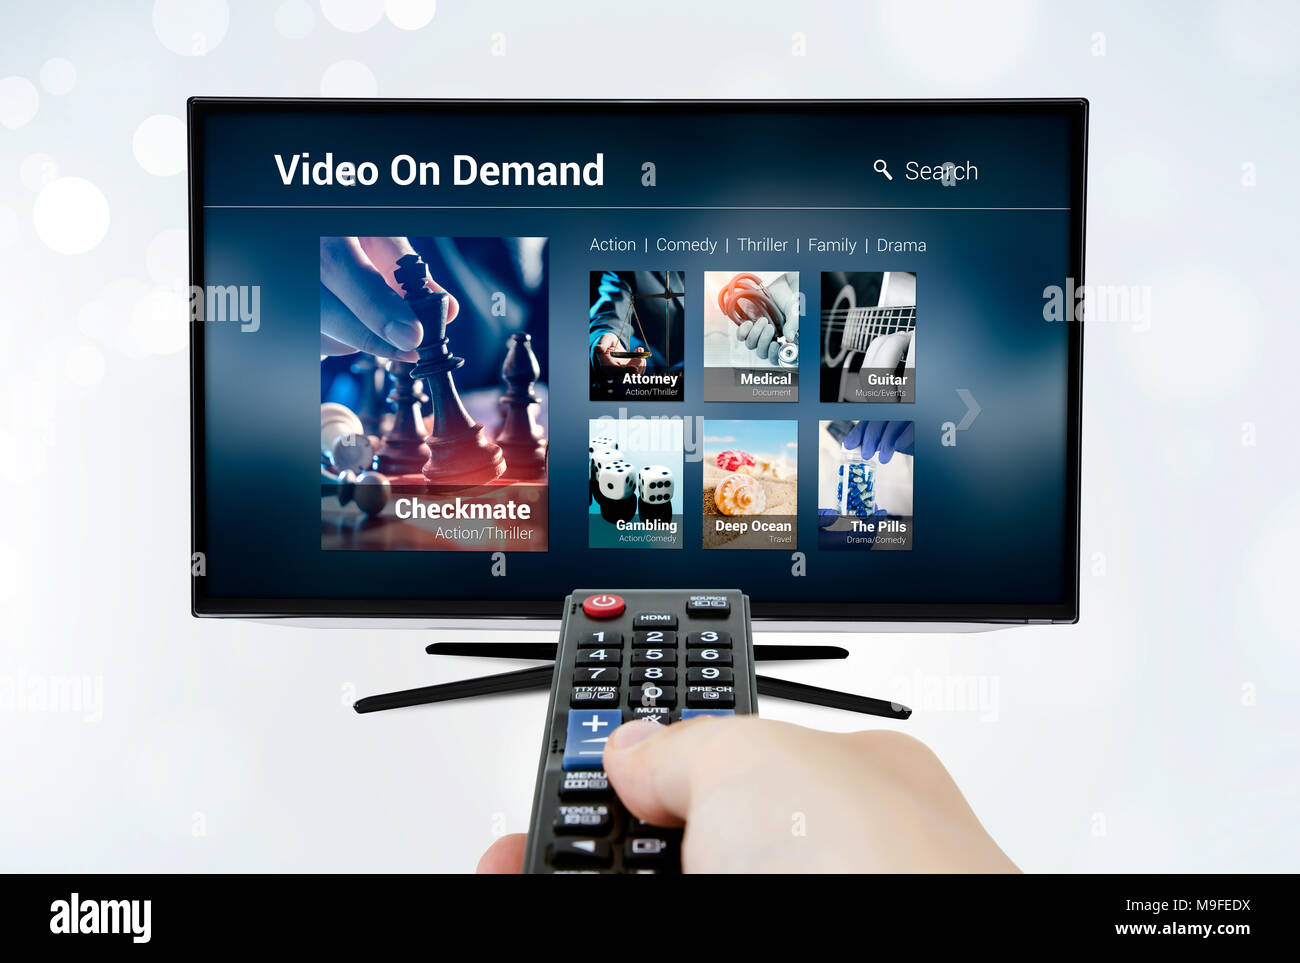 Video on demand VOD application or service on smart TV